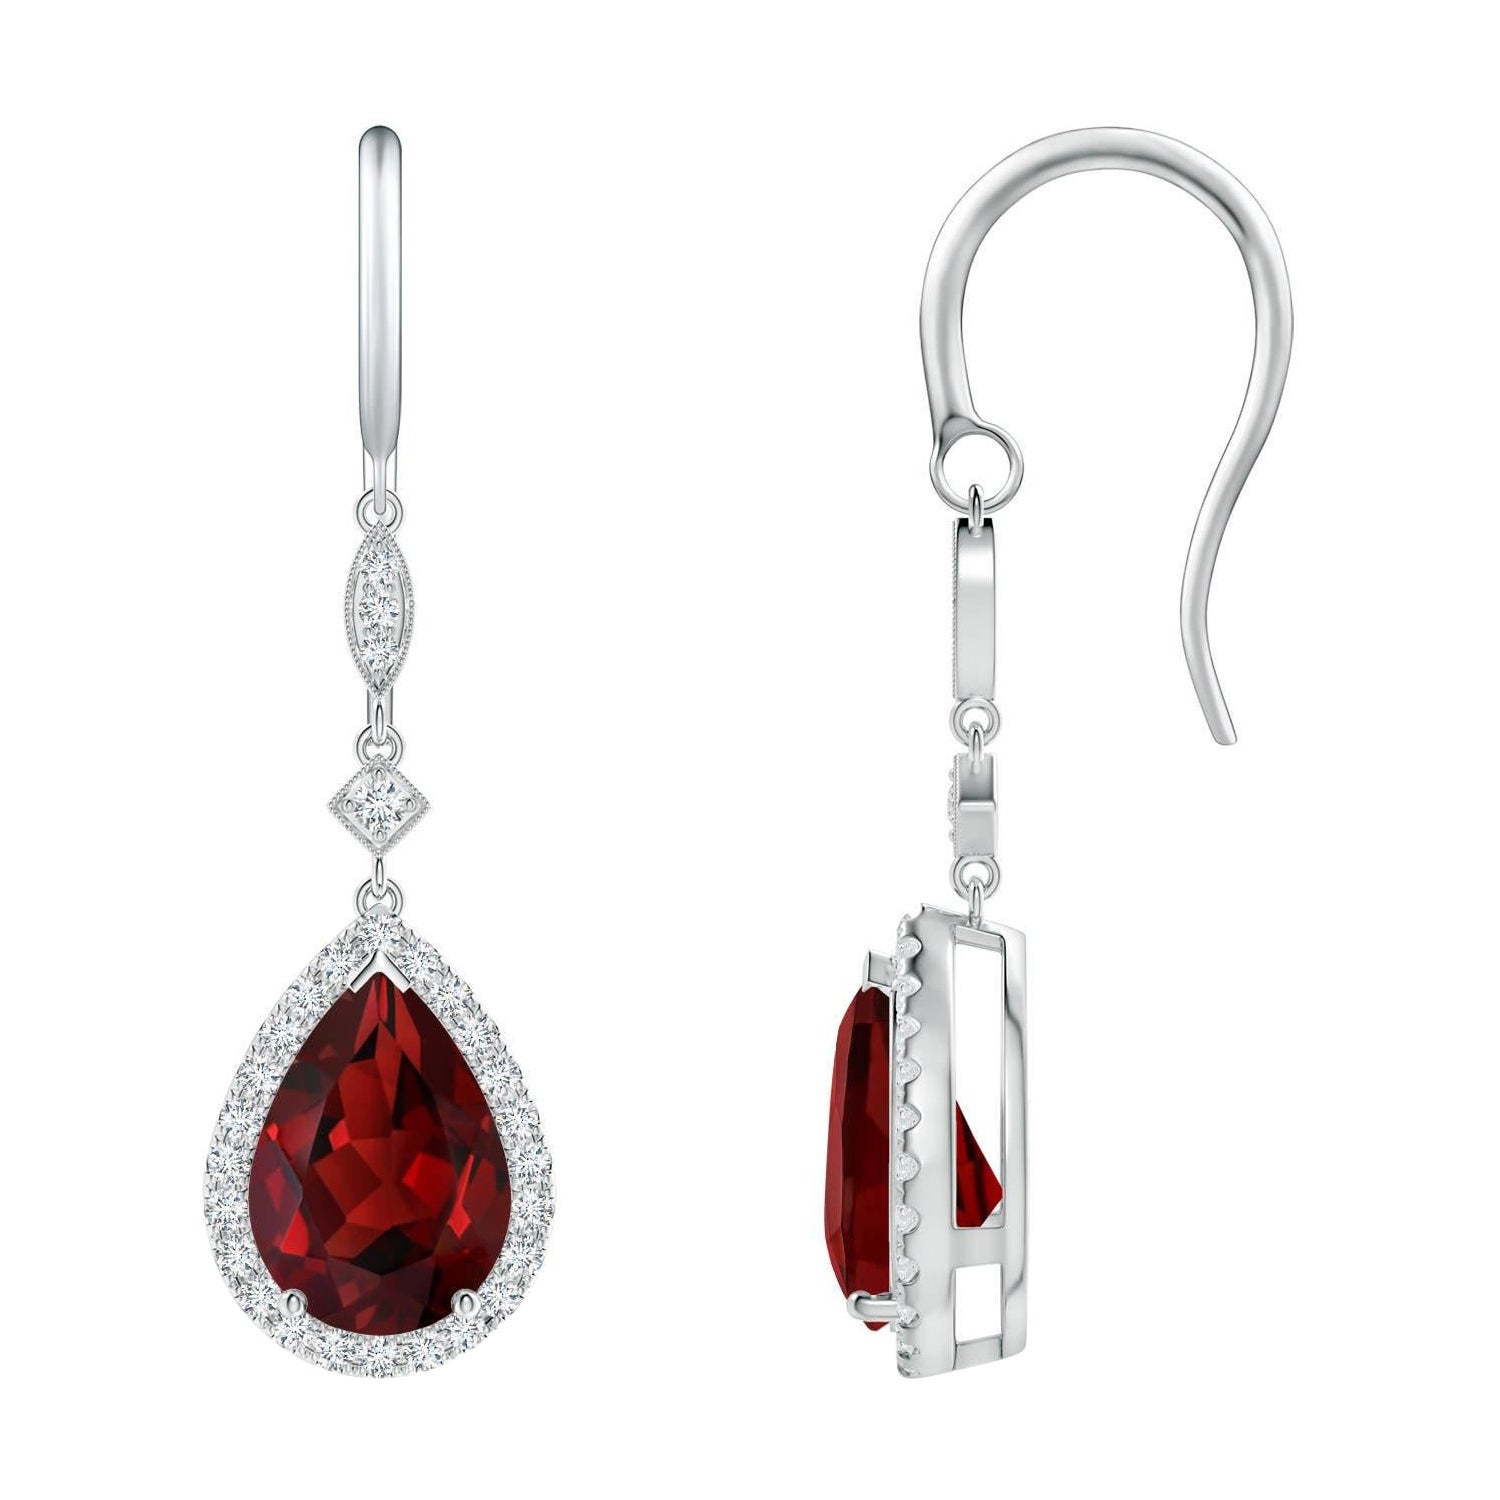 Natural Pear-Shaped 4.2ct Garnet Drop Earrings with Diamond in 14K White Gold For Sale